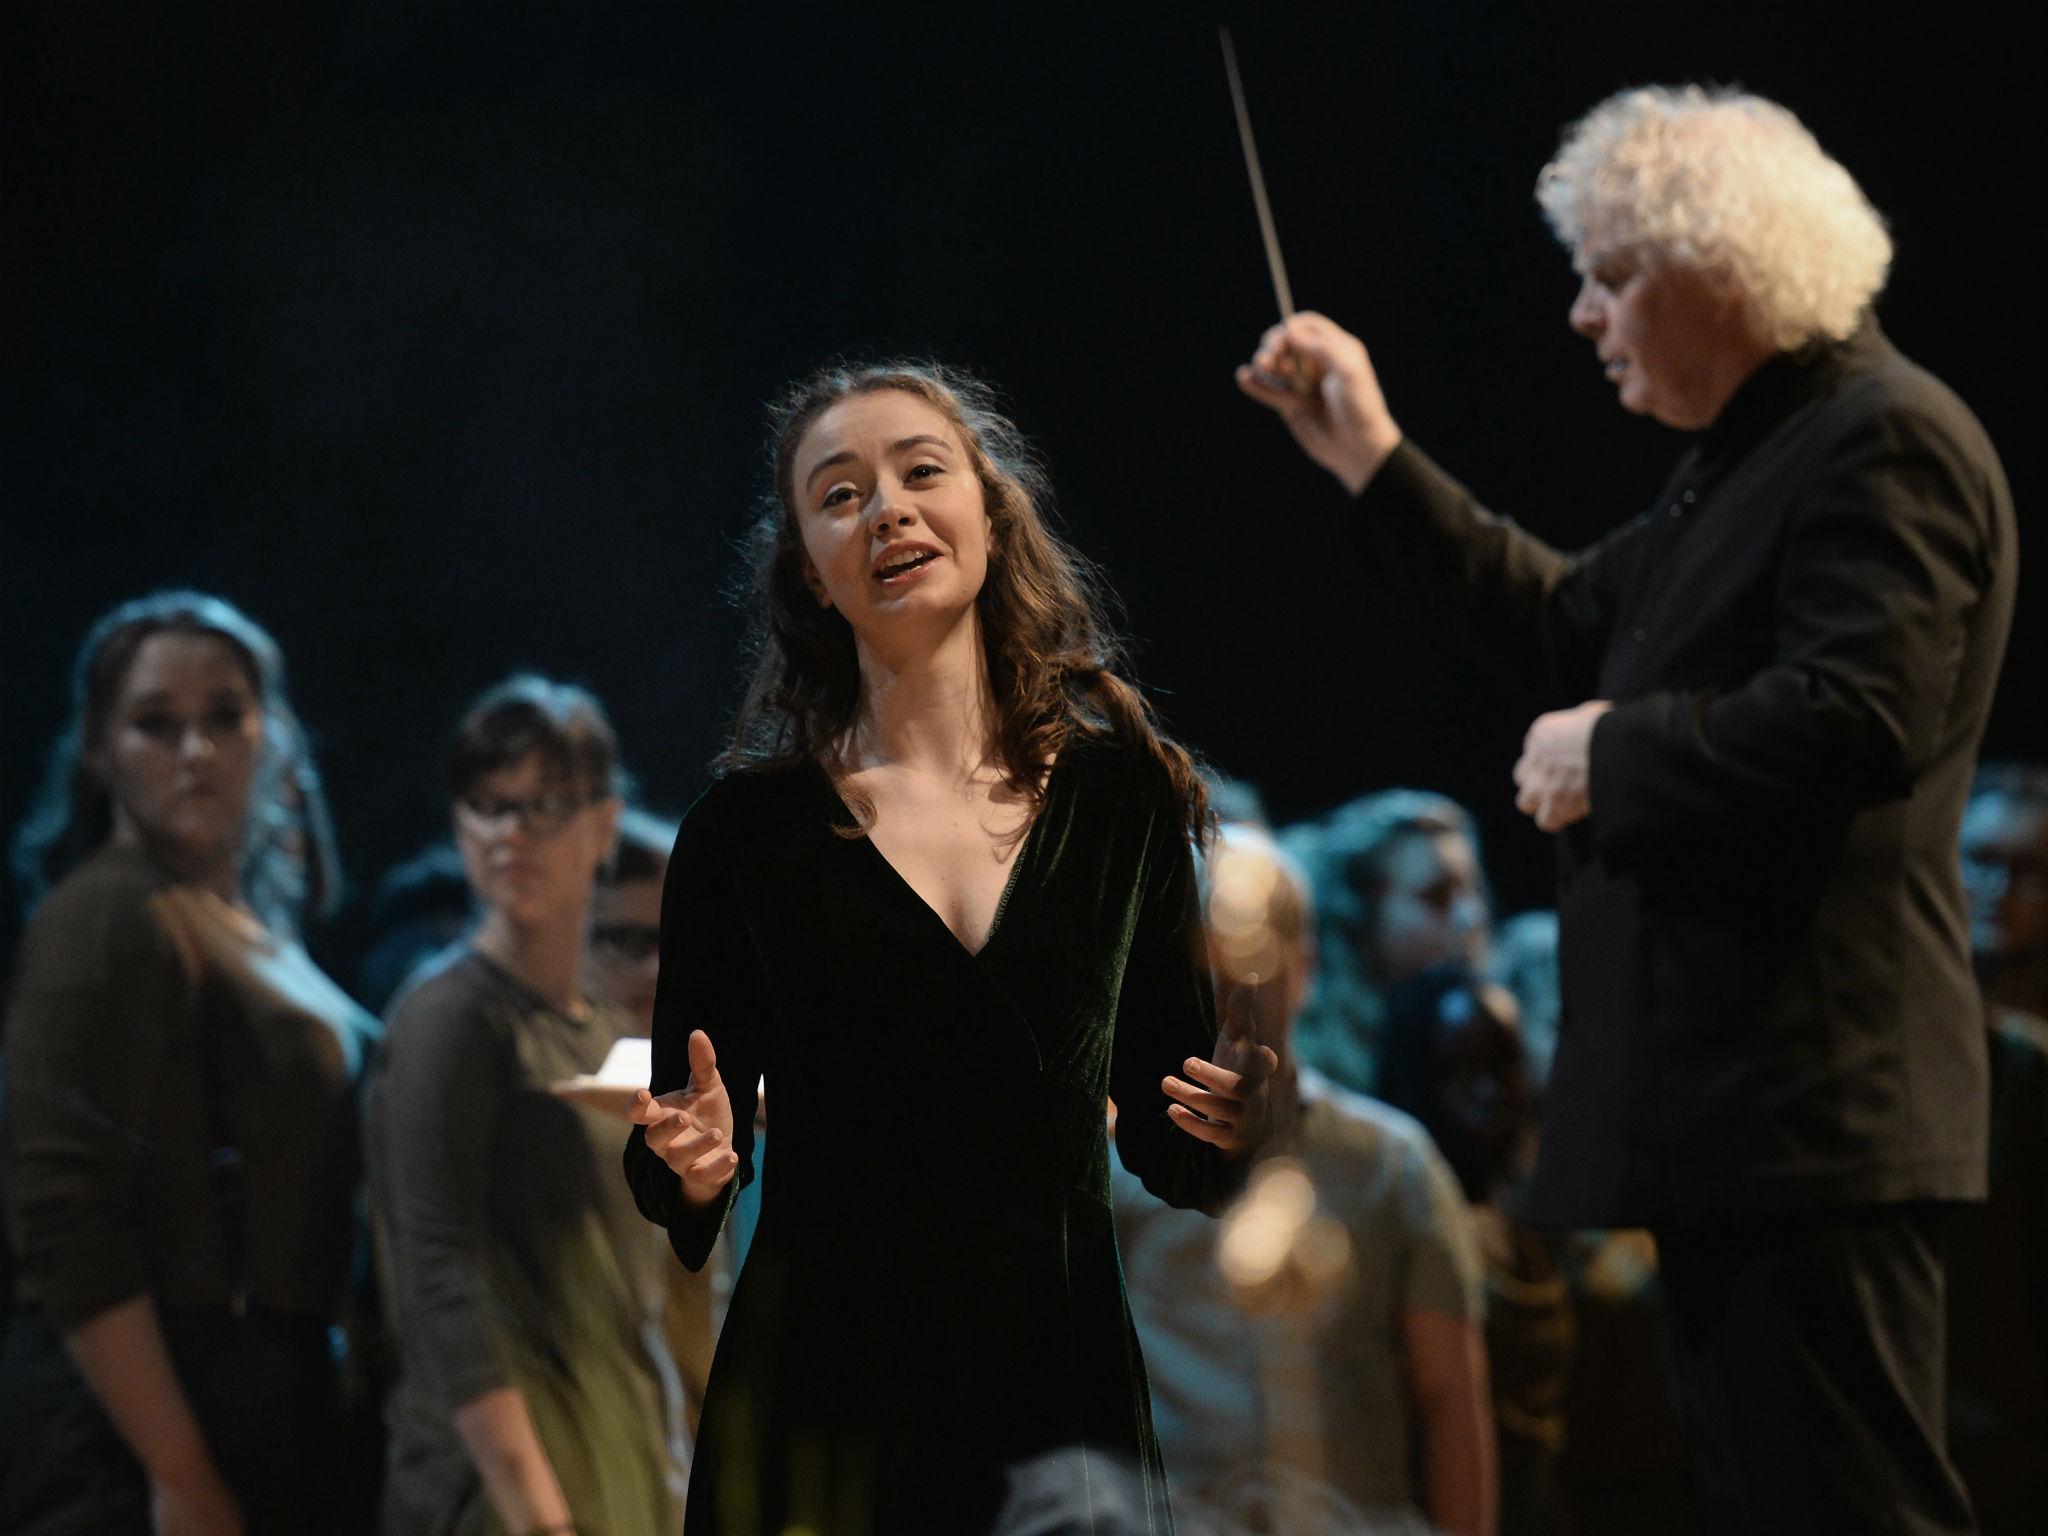 Simon Rattle conducts the LSO production of Peter Maxwell Davies’s last major work